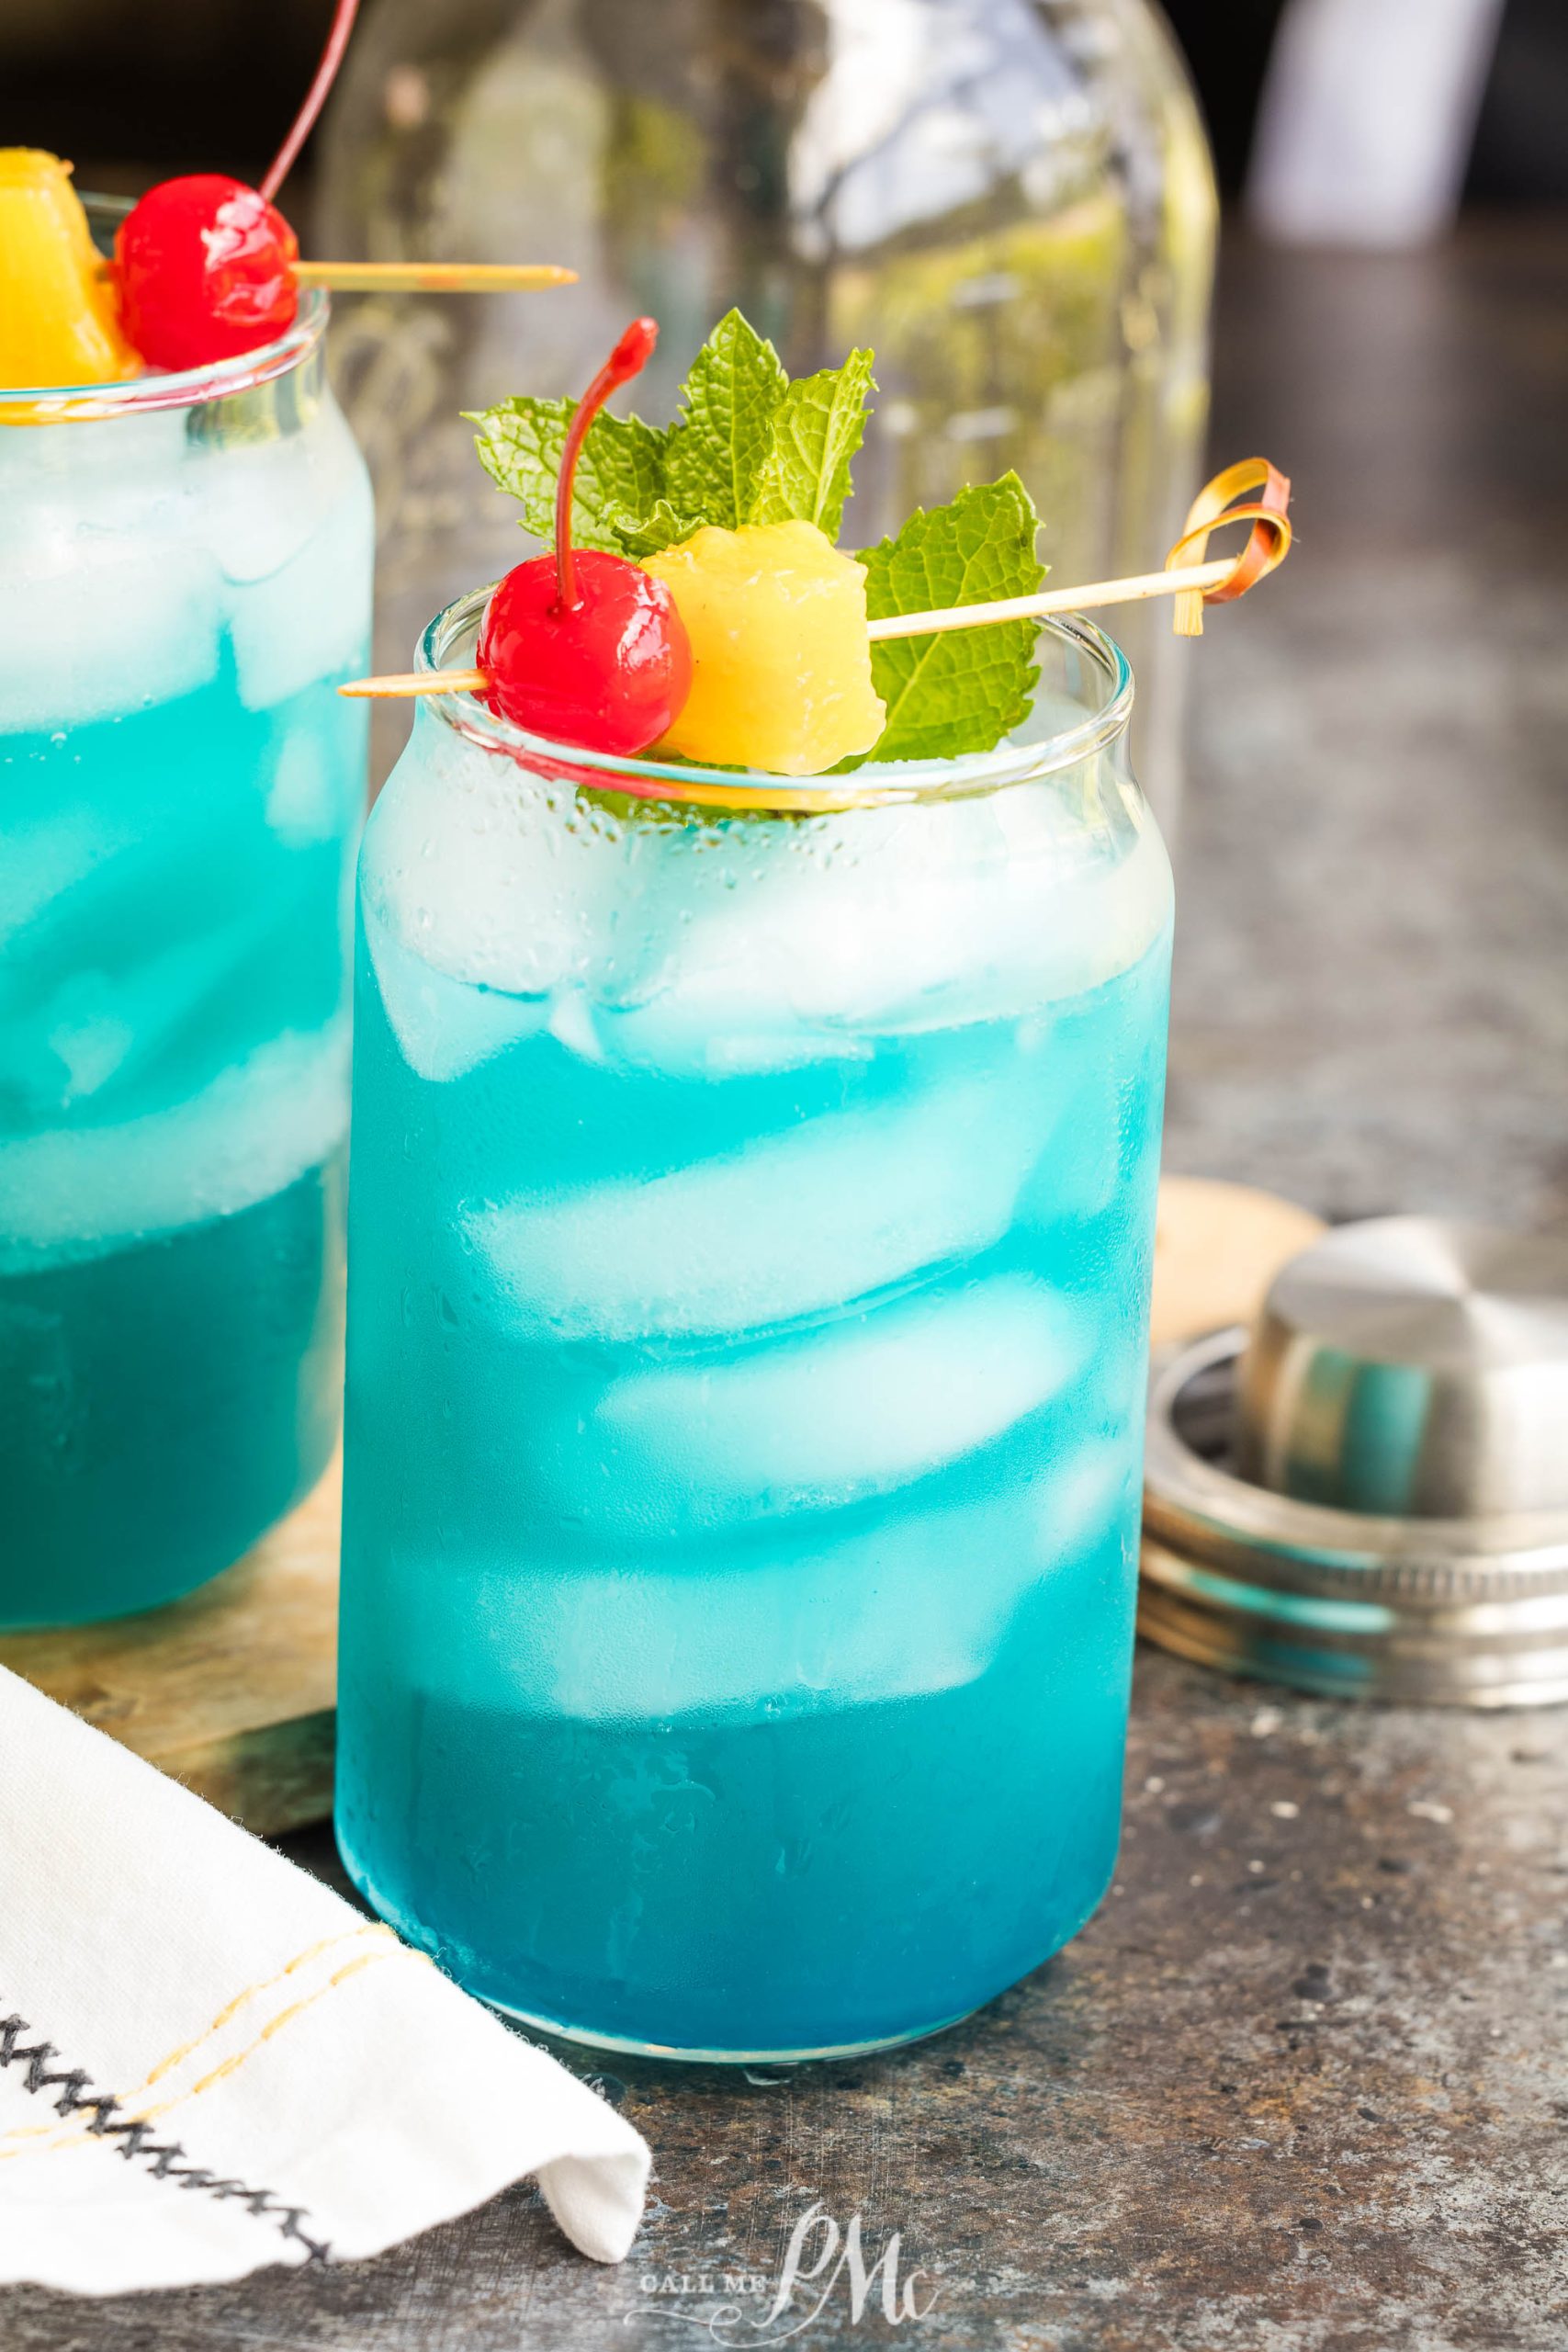 A clear glass filled with a blue liquid, ice cubes, and garnished with a cherry, pineapple chunks, and mint leaves on a skewer.